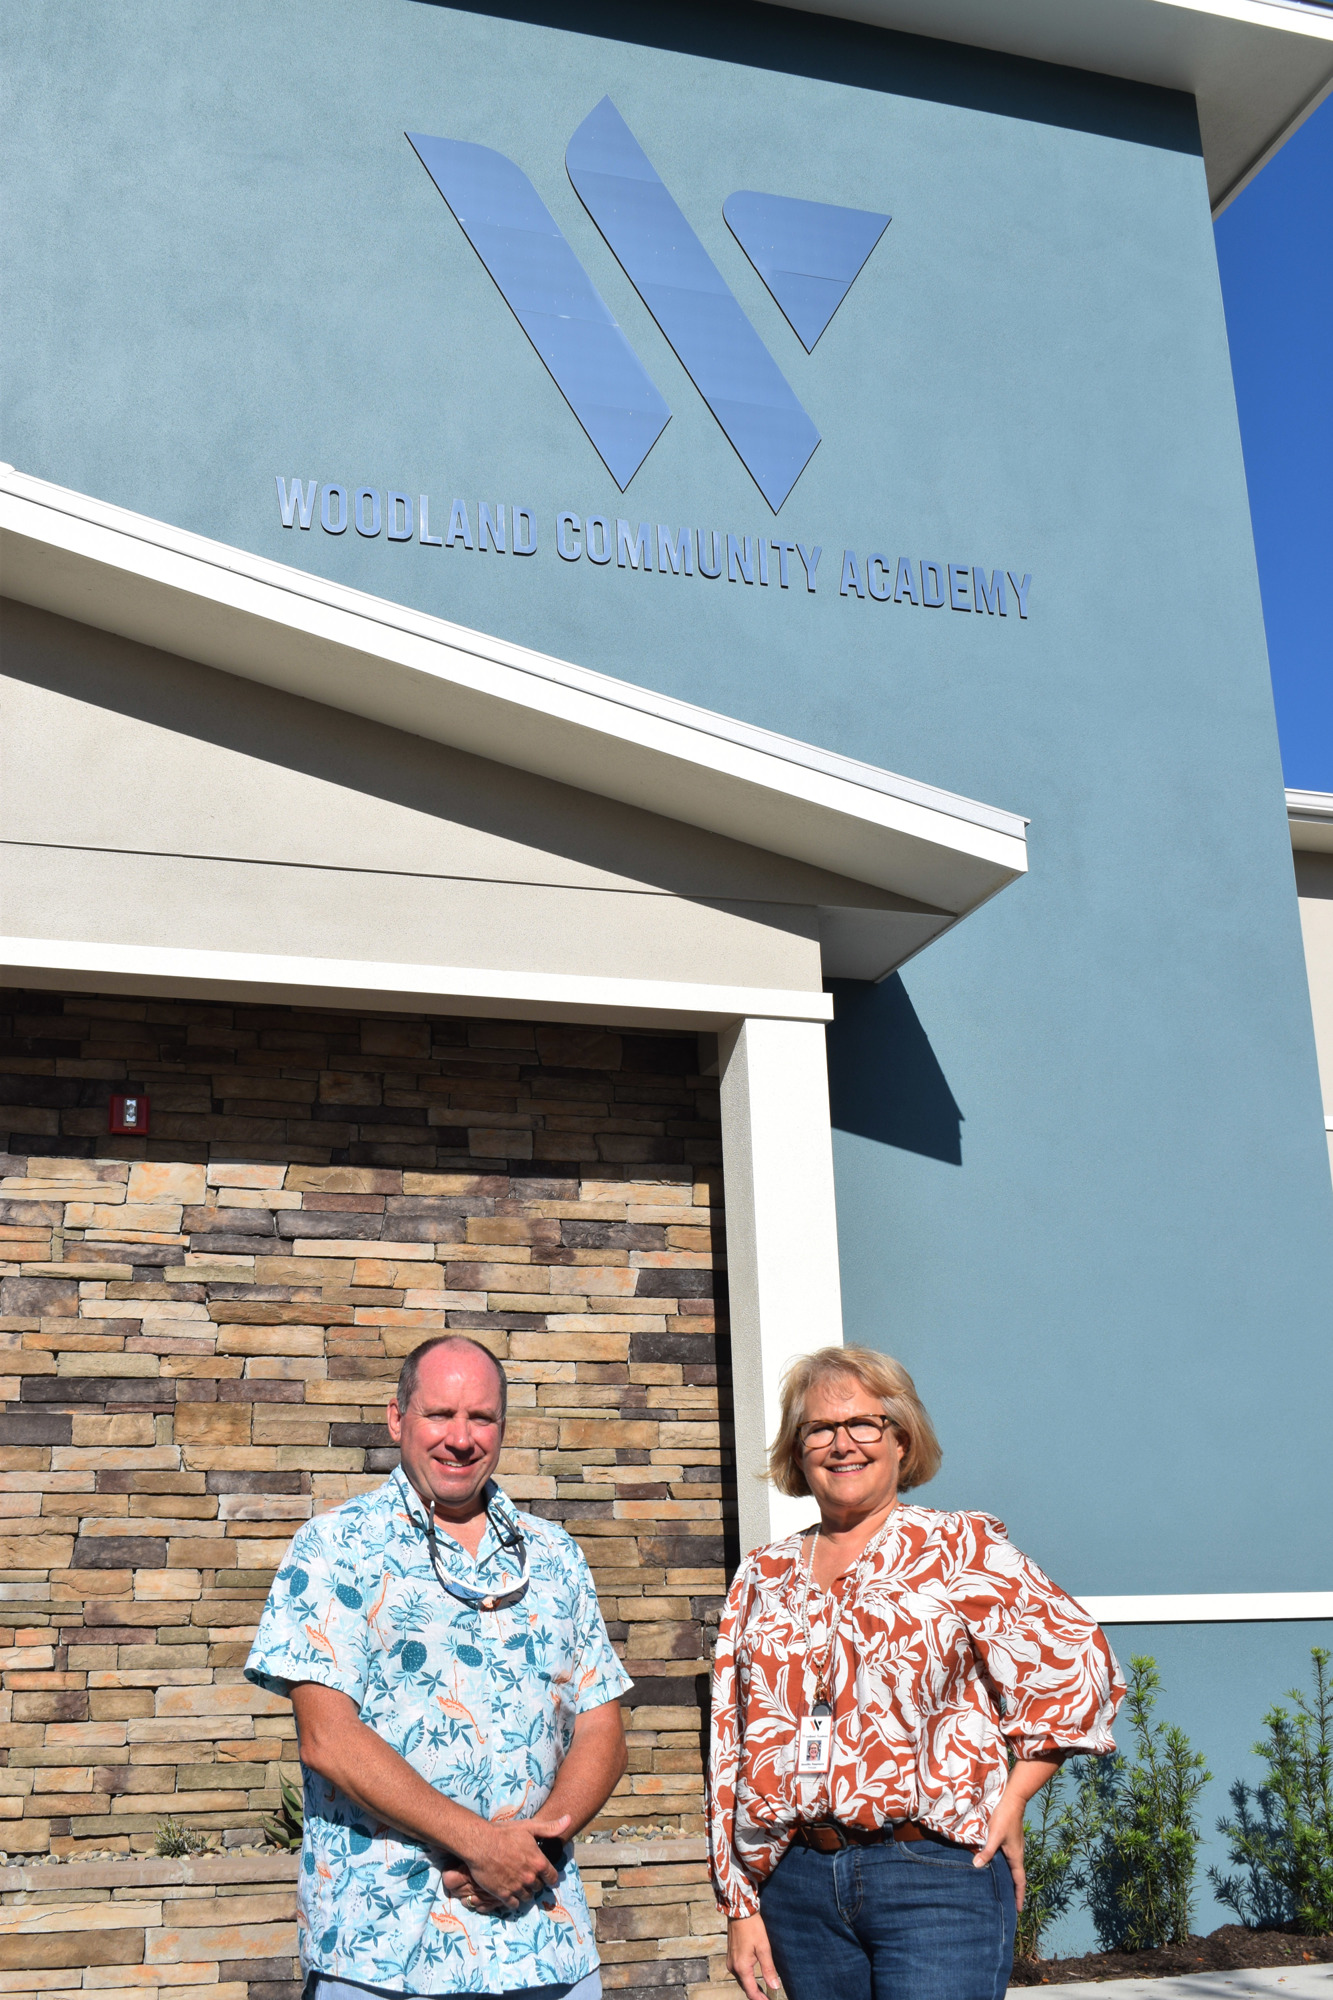 Dewayne McFarlin, the executive pastor of Woodland Community Church, and Jennifer Passmore, the director of Woodland Community Academy, are thrilled to have the middle school facility complete after delays due to the pandemic.